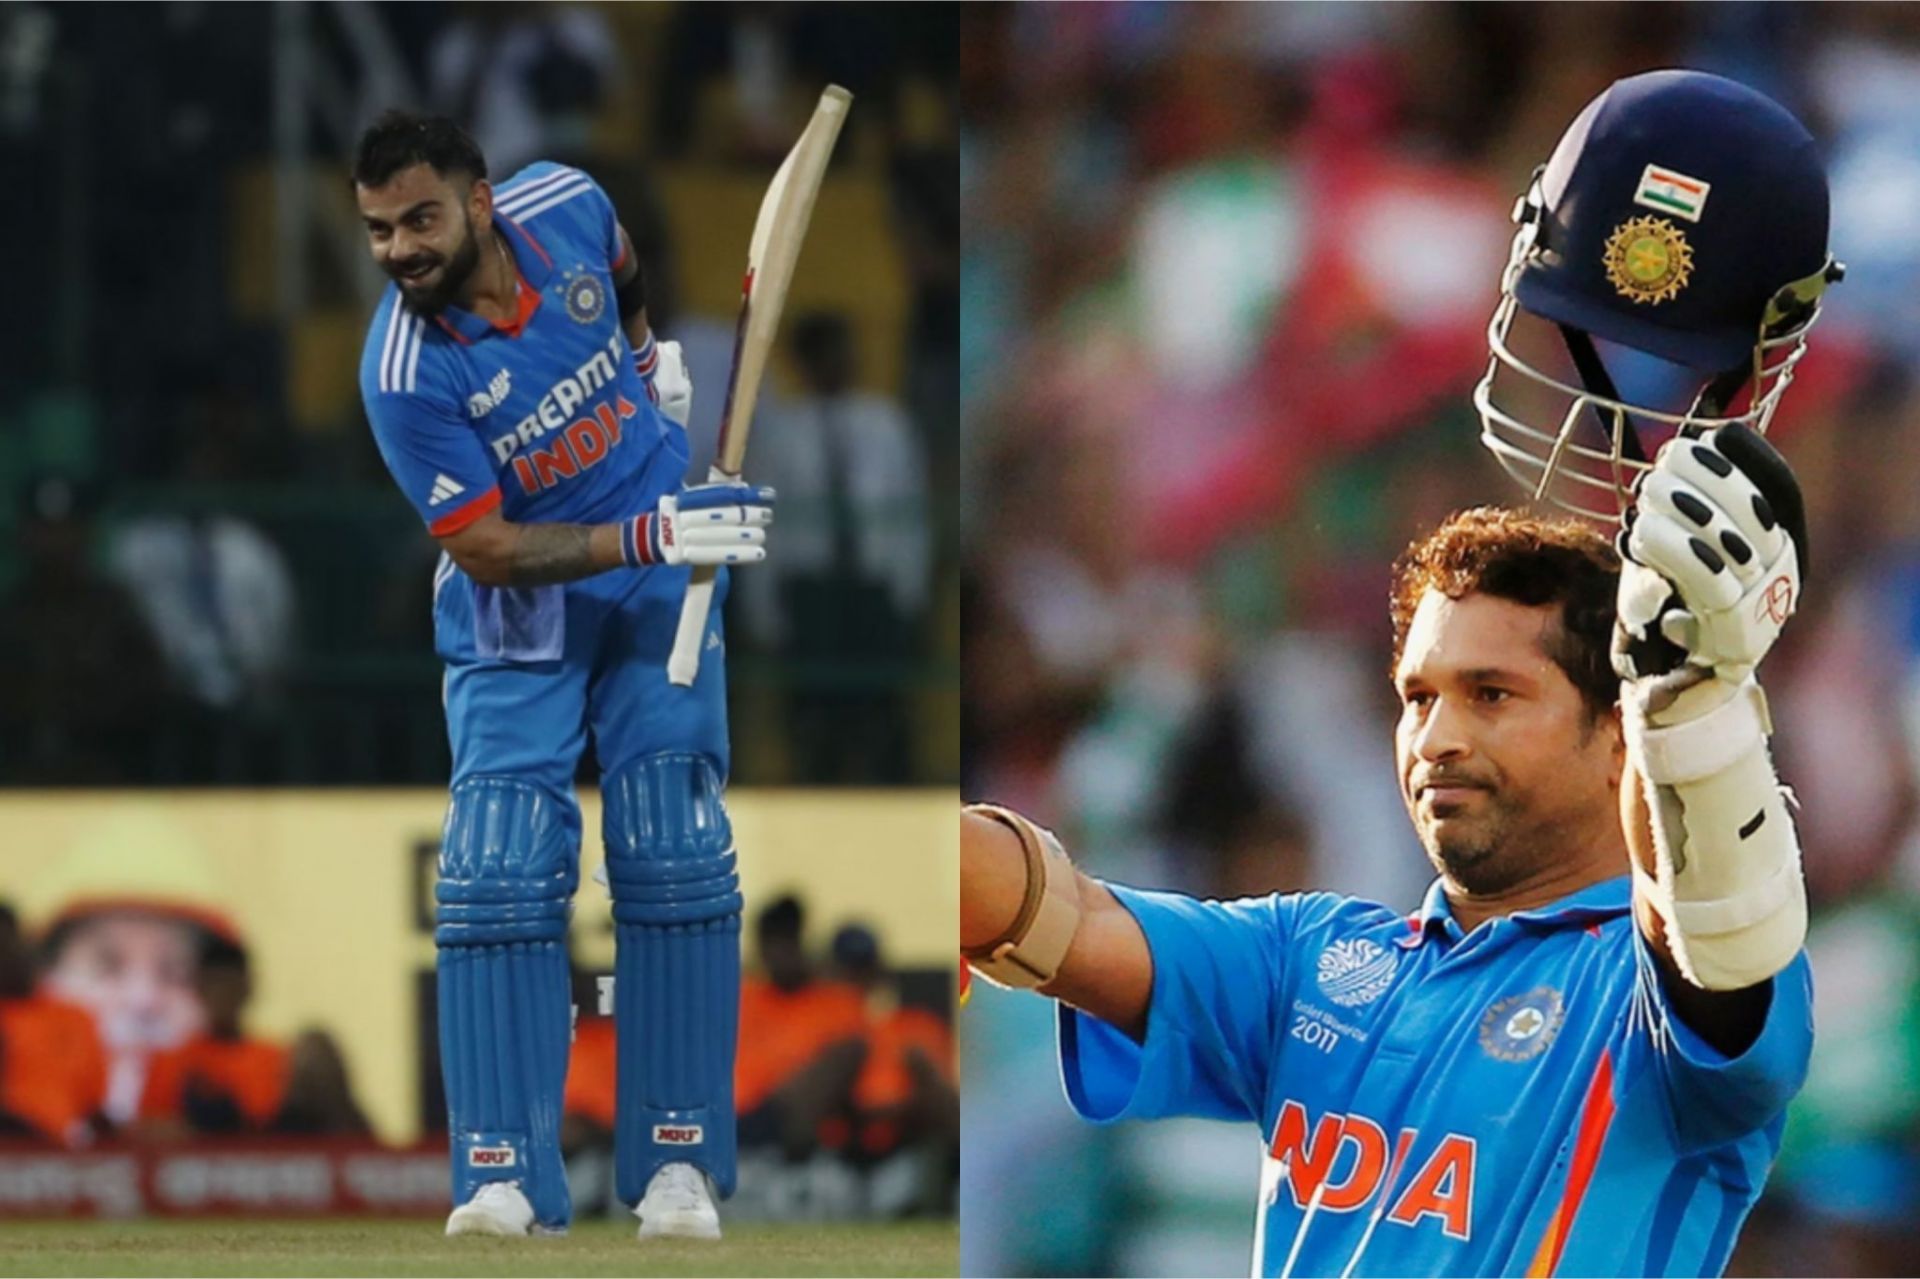 Virat Kohli and Sachin Tendulkar are the two players with the most ODI centuries [Getty Images]